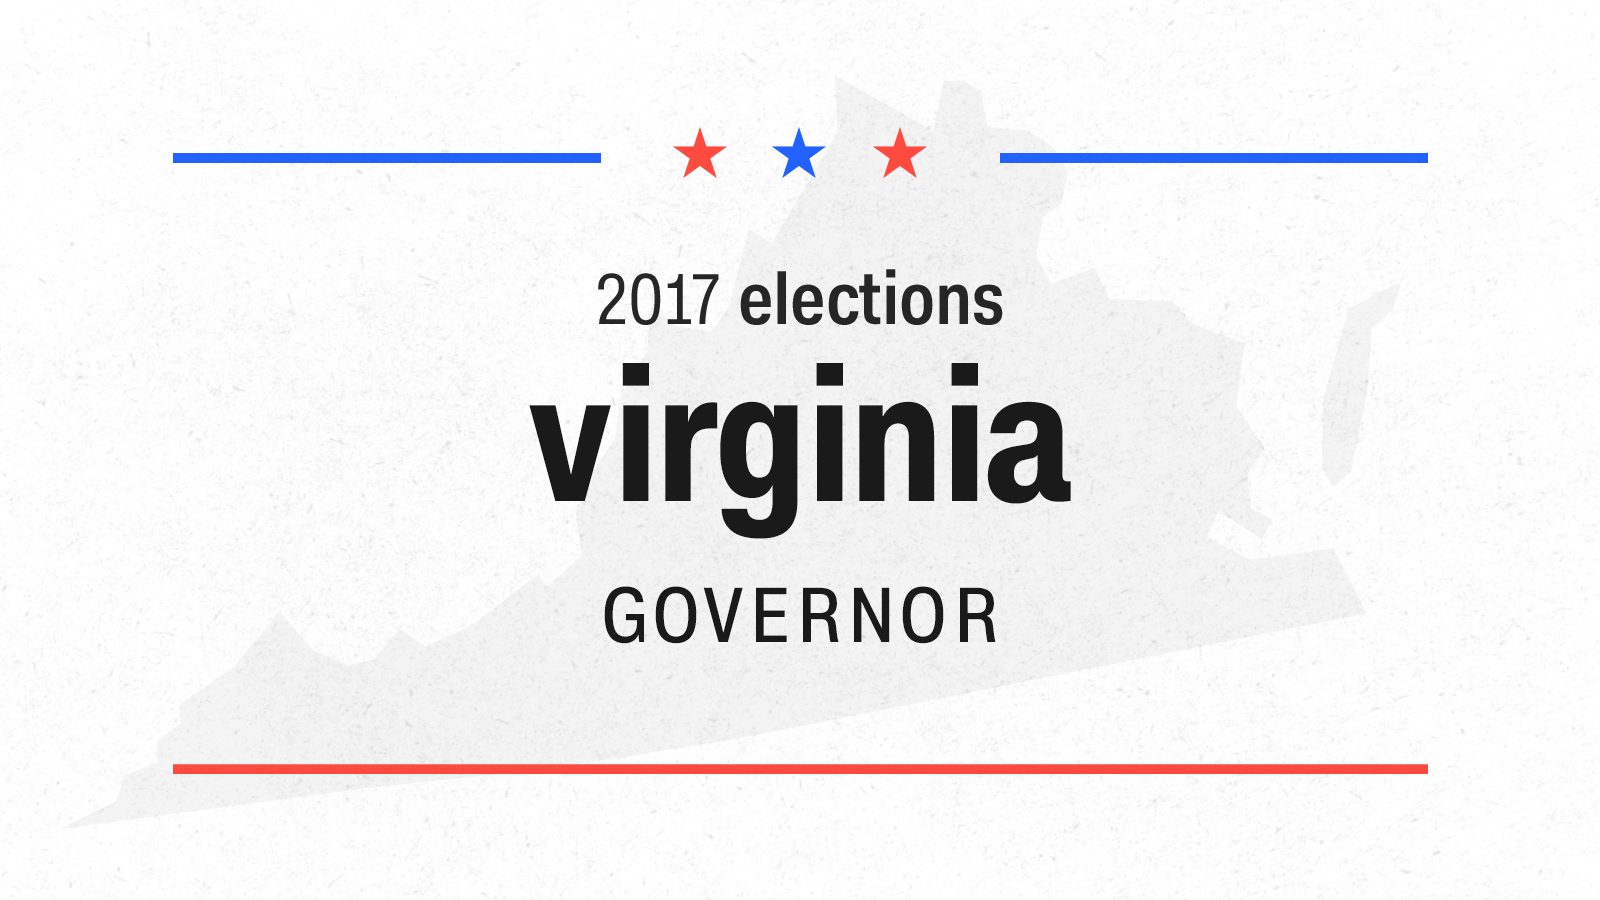 virginia governor national dominate ad wars